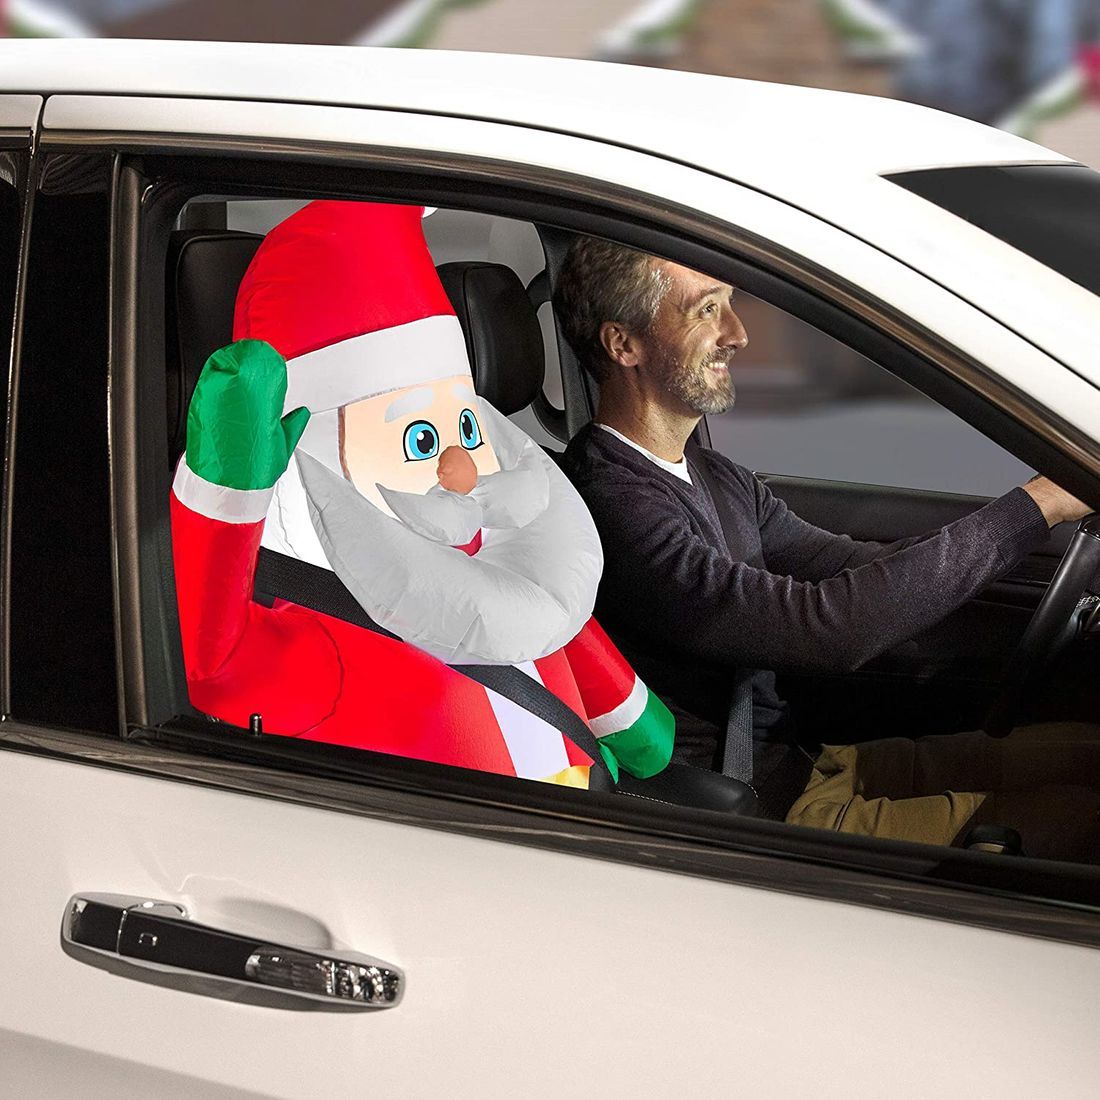 These Inflatable Car Buddies Will Keep You Company While You’re Stuck In Traffic This Holiday Season